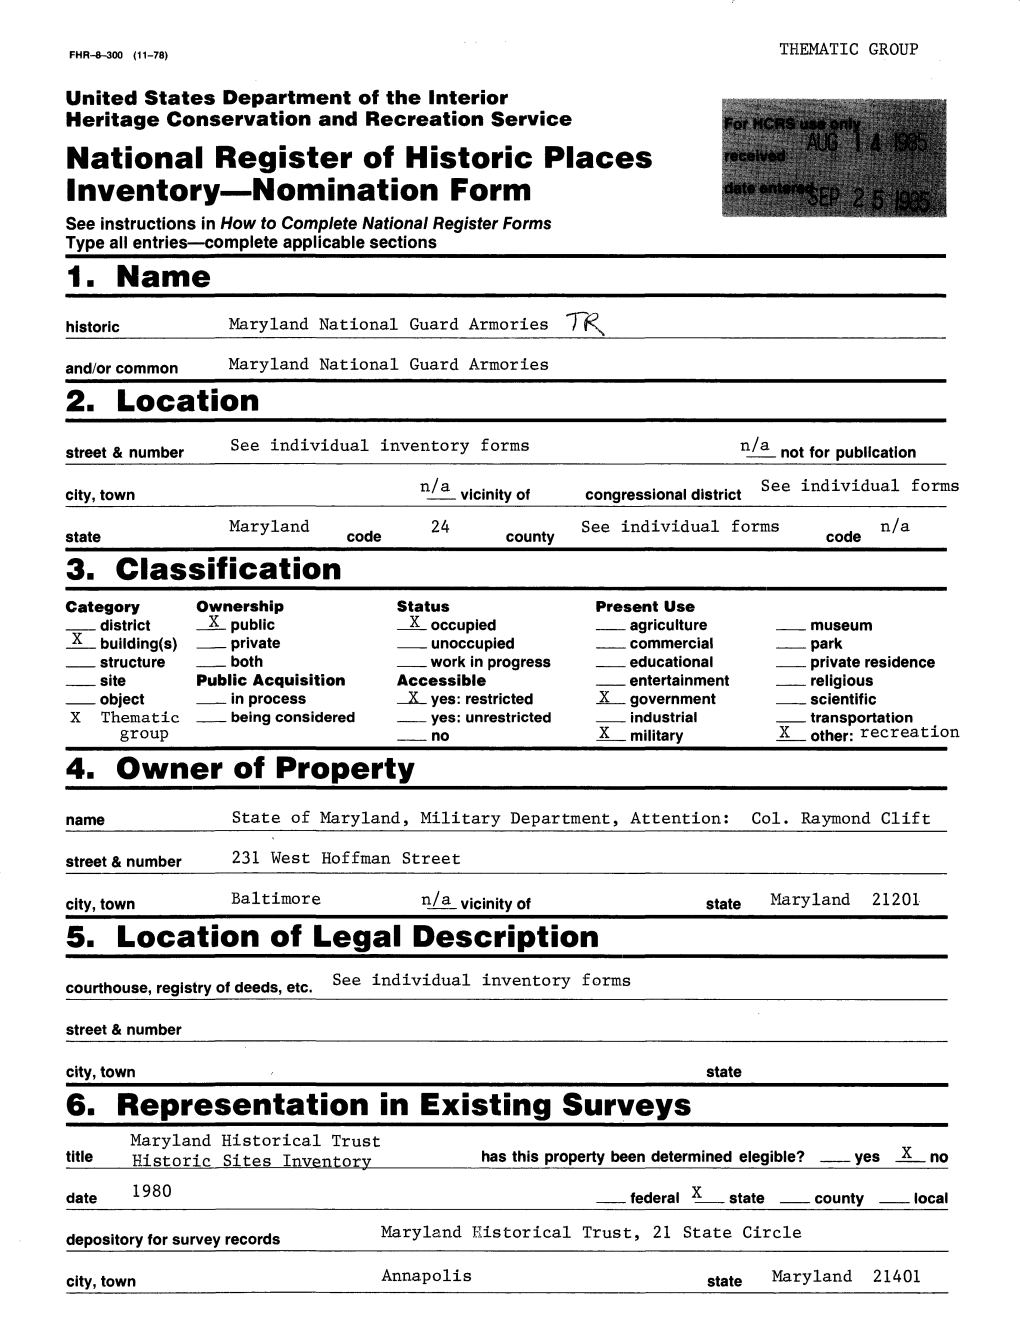 2. Location Street & Number See Individual Inventory Forms N/A Not for Publication